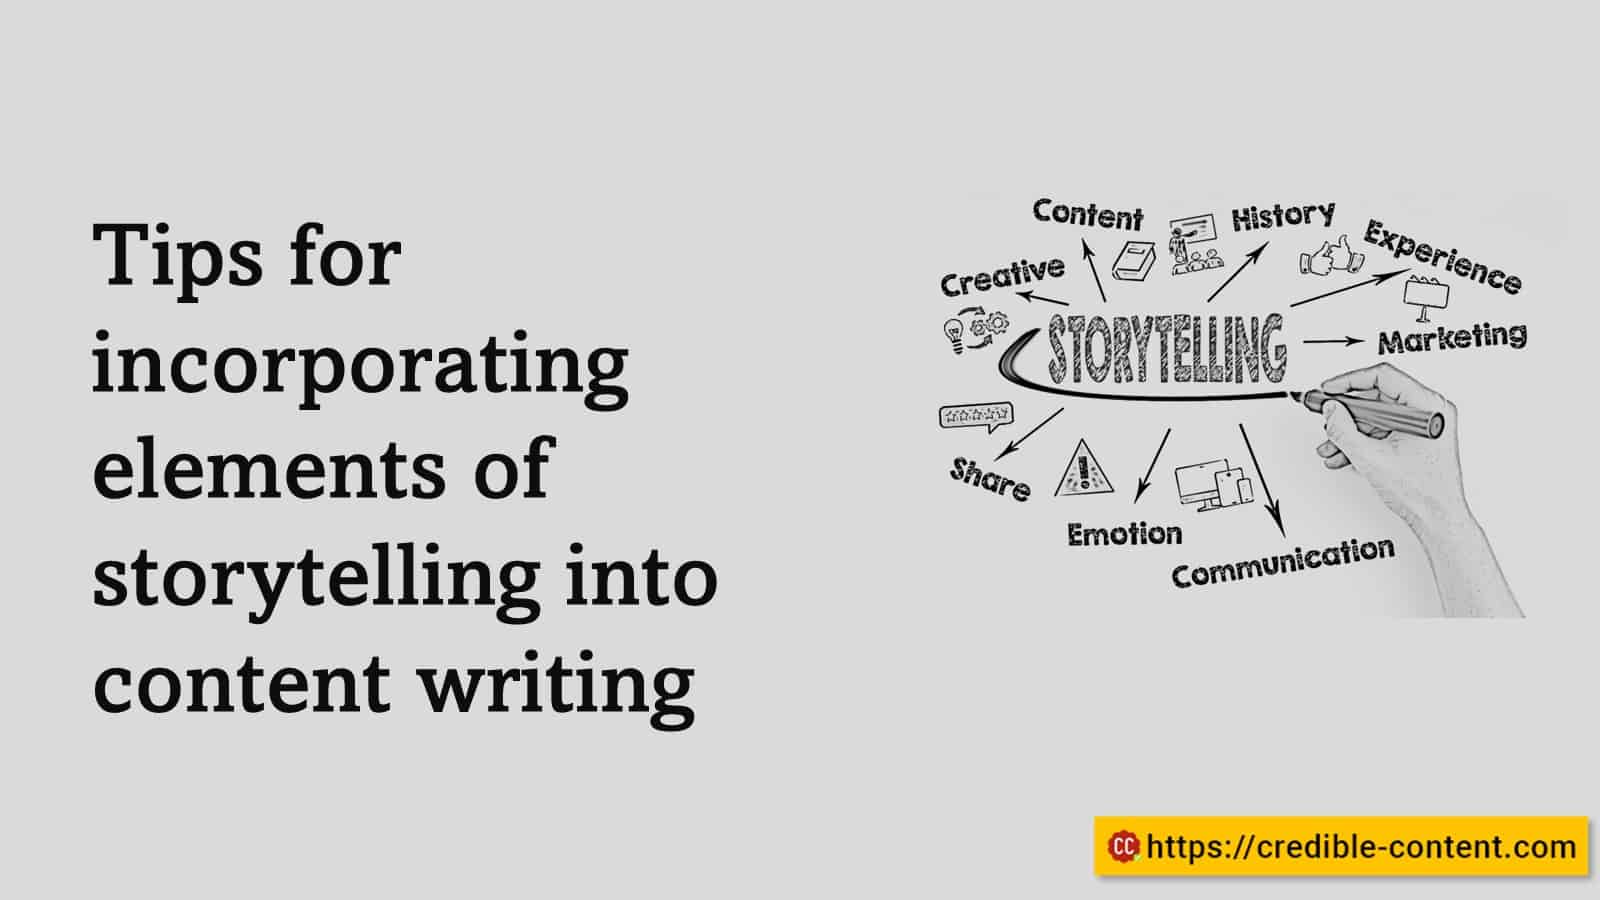 Tips for incorporating elements of storytelling into content writing